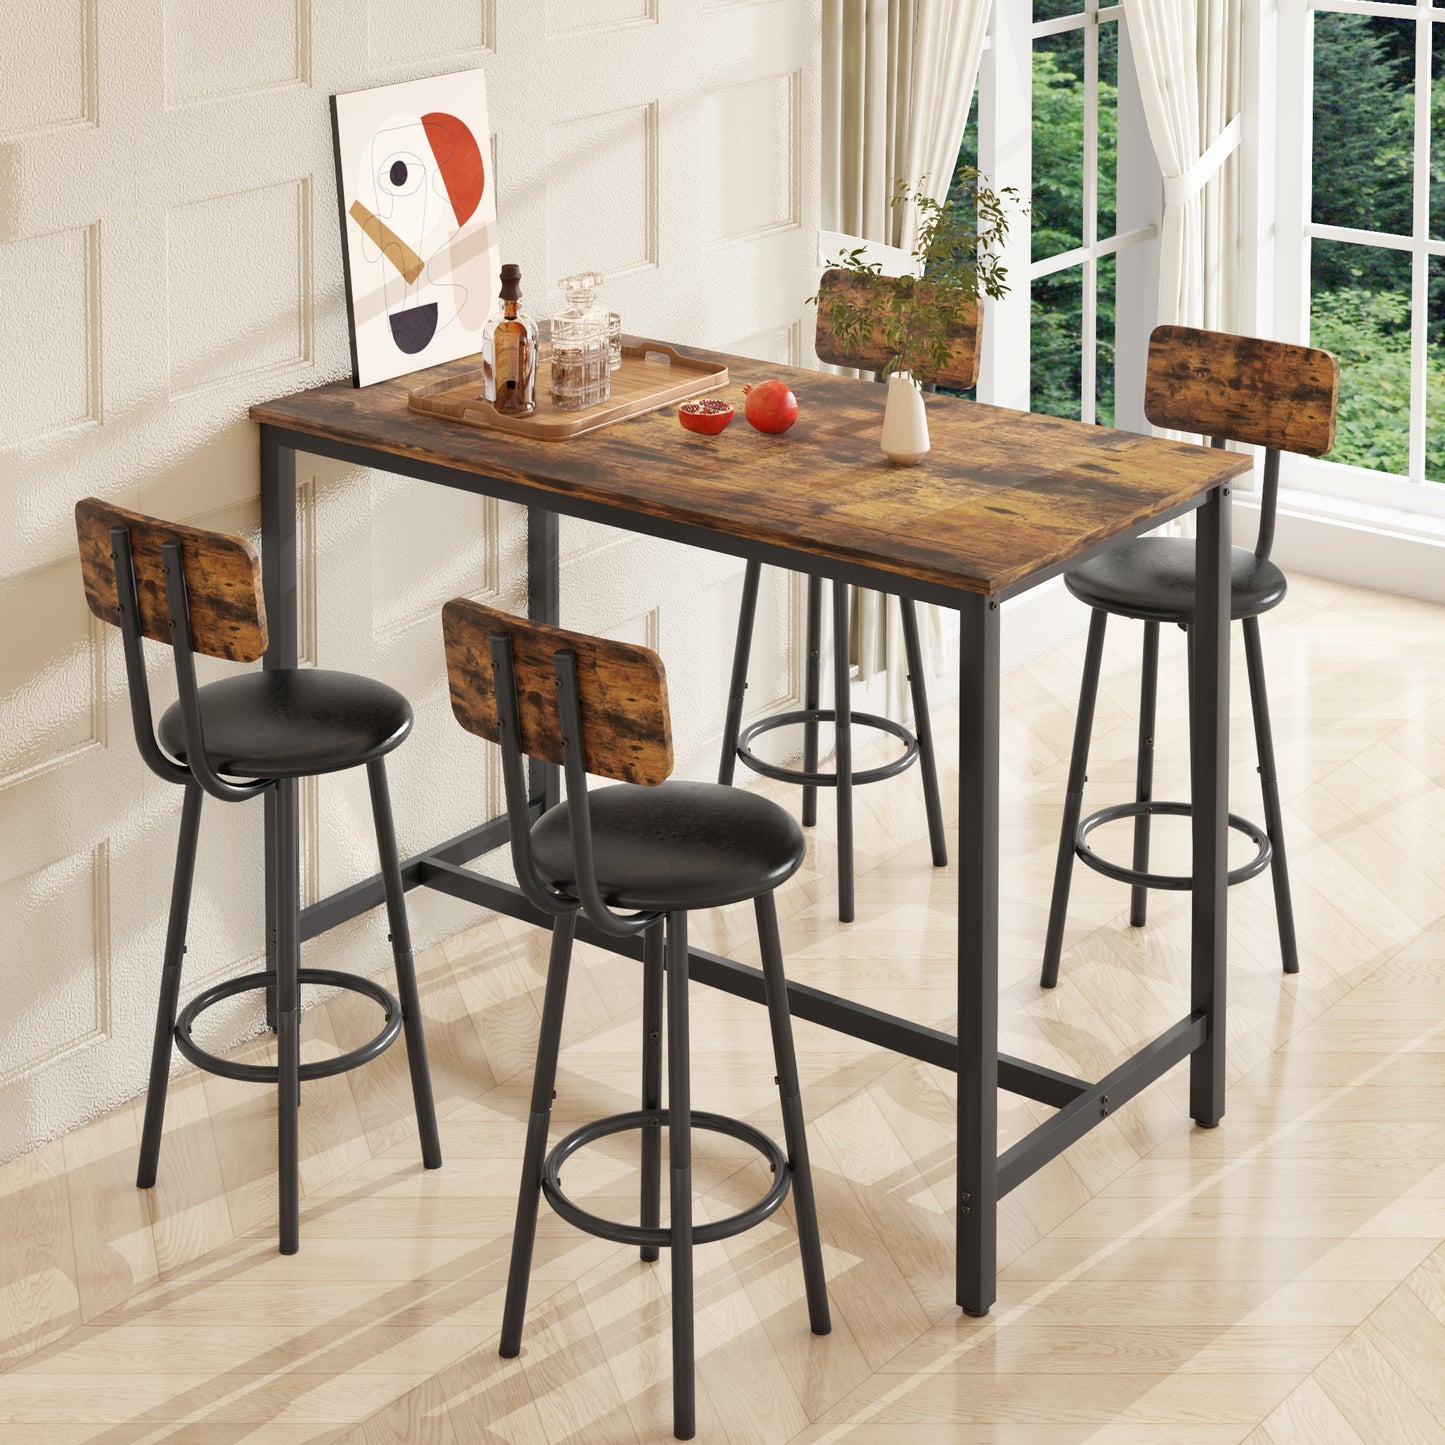 Modern Counter Height Pub Set, 5 Piece Dining Table Set with 4 Cushioned Stools, Extra Long Bistro Bar Table with Footrest, Kitchen Breakfast Table Set for 4, Rustic Brown